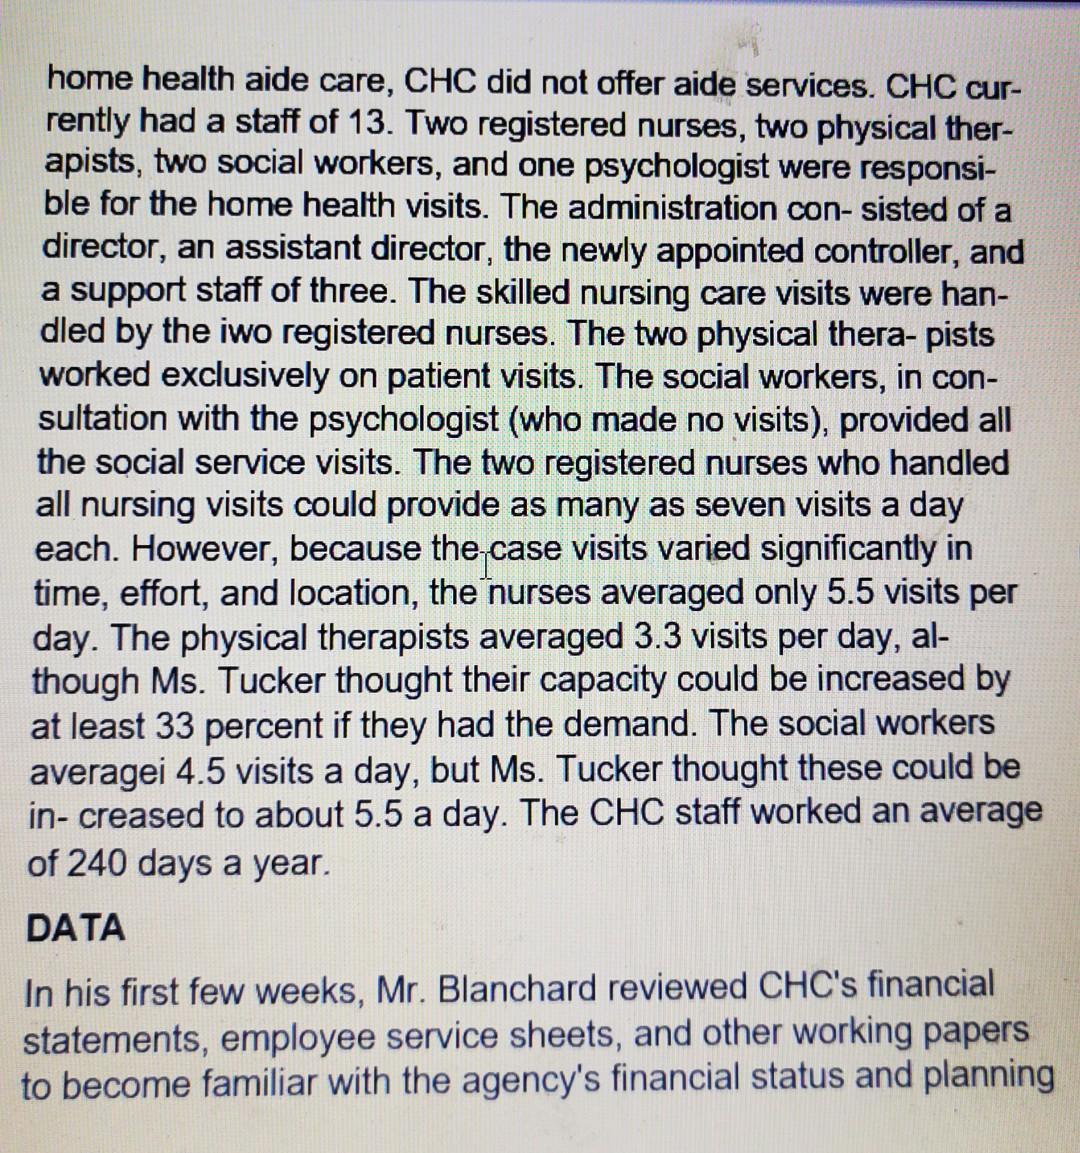 home health aide care, CHC did not offer aide services. CHC cur- rently had a staff of 13. Two registered nurses, two physica